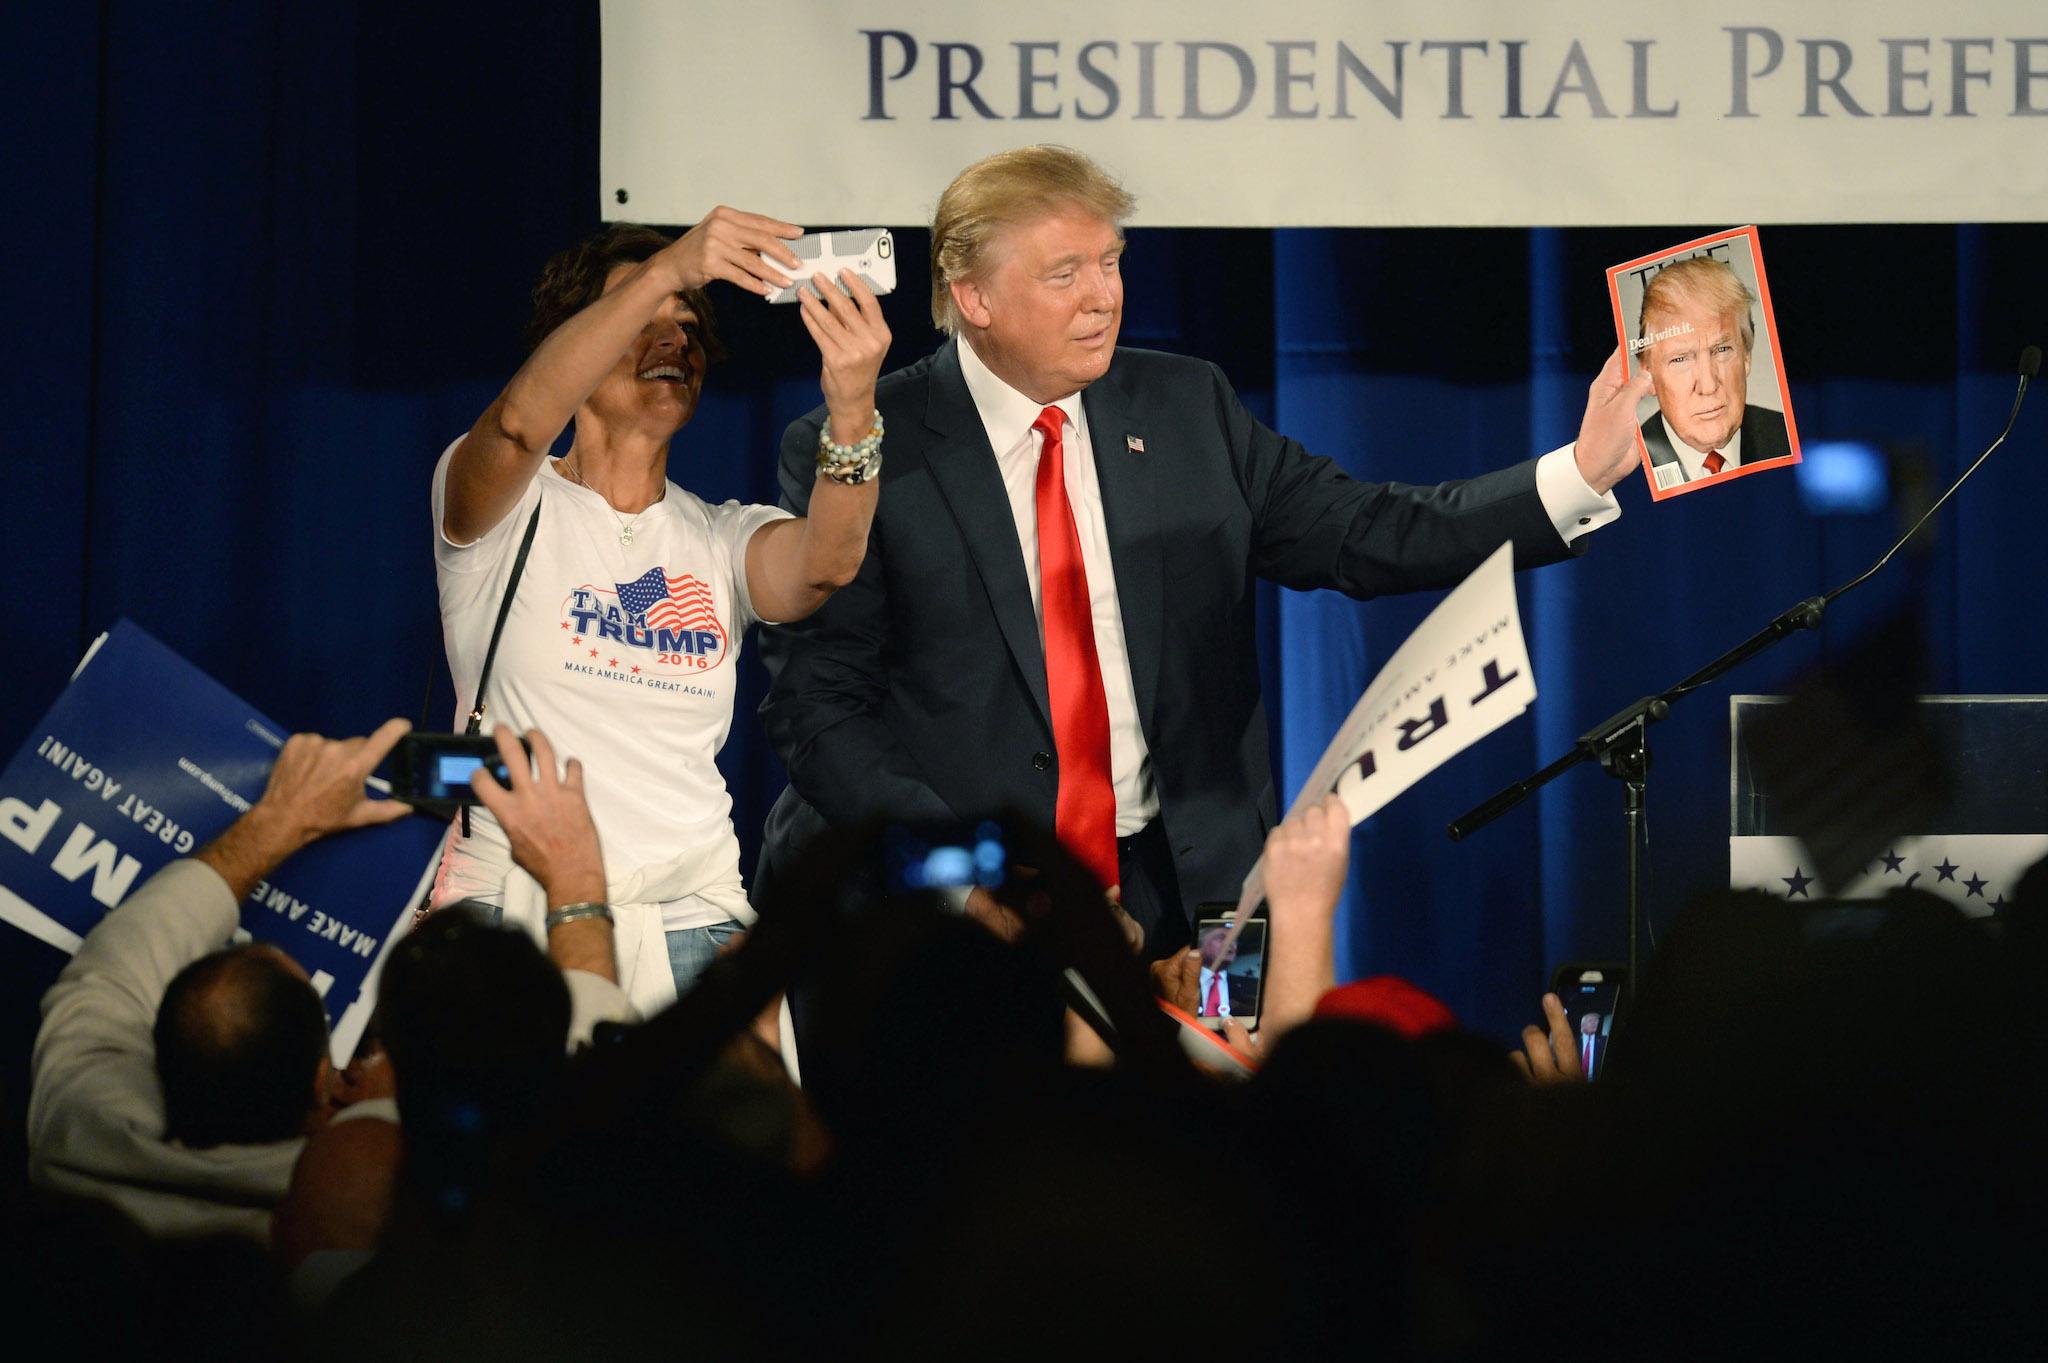 Republican presidential candidate Donald Trump holds a copy of TIME magazine with his likeness of the cover as a woman tries to take a selfie at the National Federation of Republican Assemblies (NFRA) Presidential Preference Convention at Rocketown on August 29, 2015 in Nashville, Tennessee